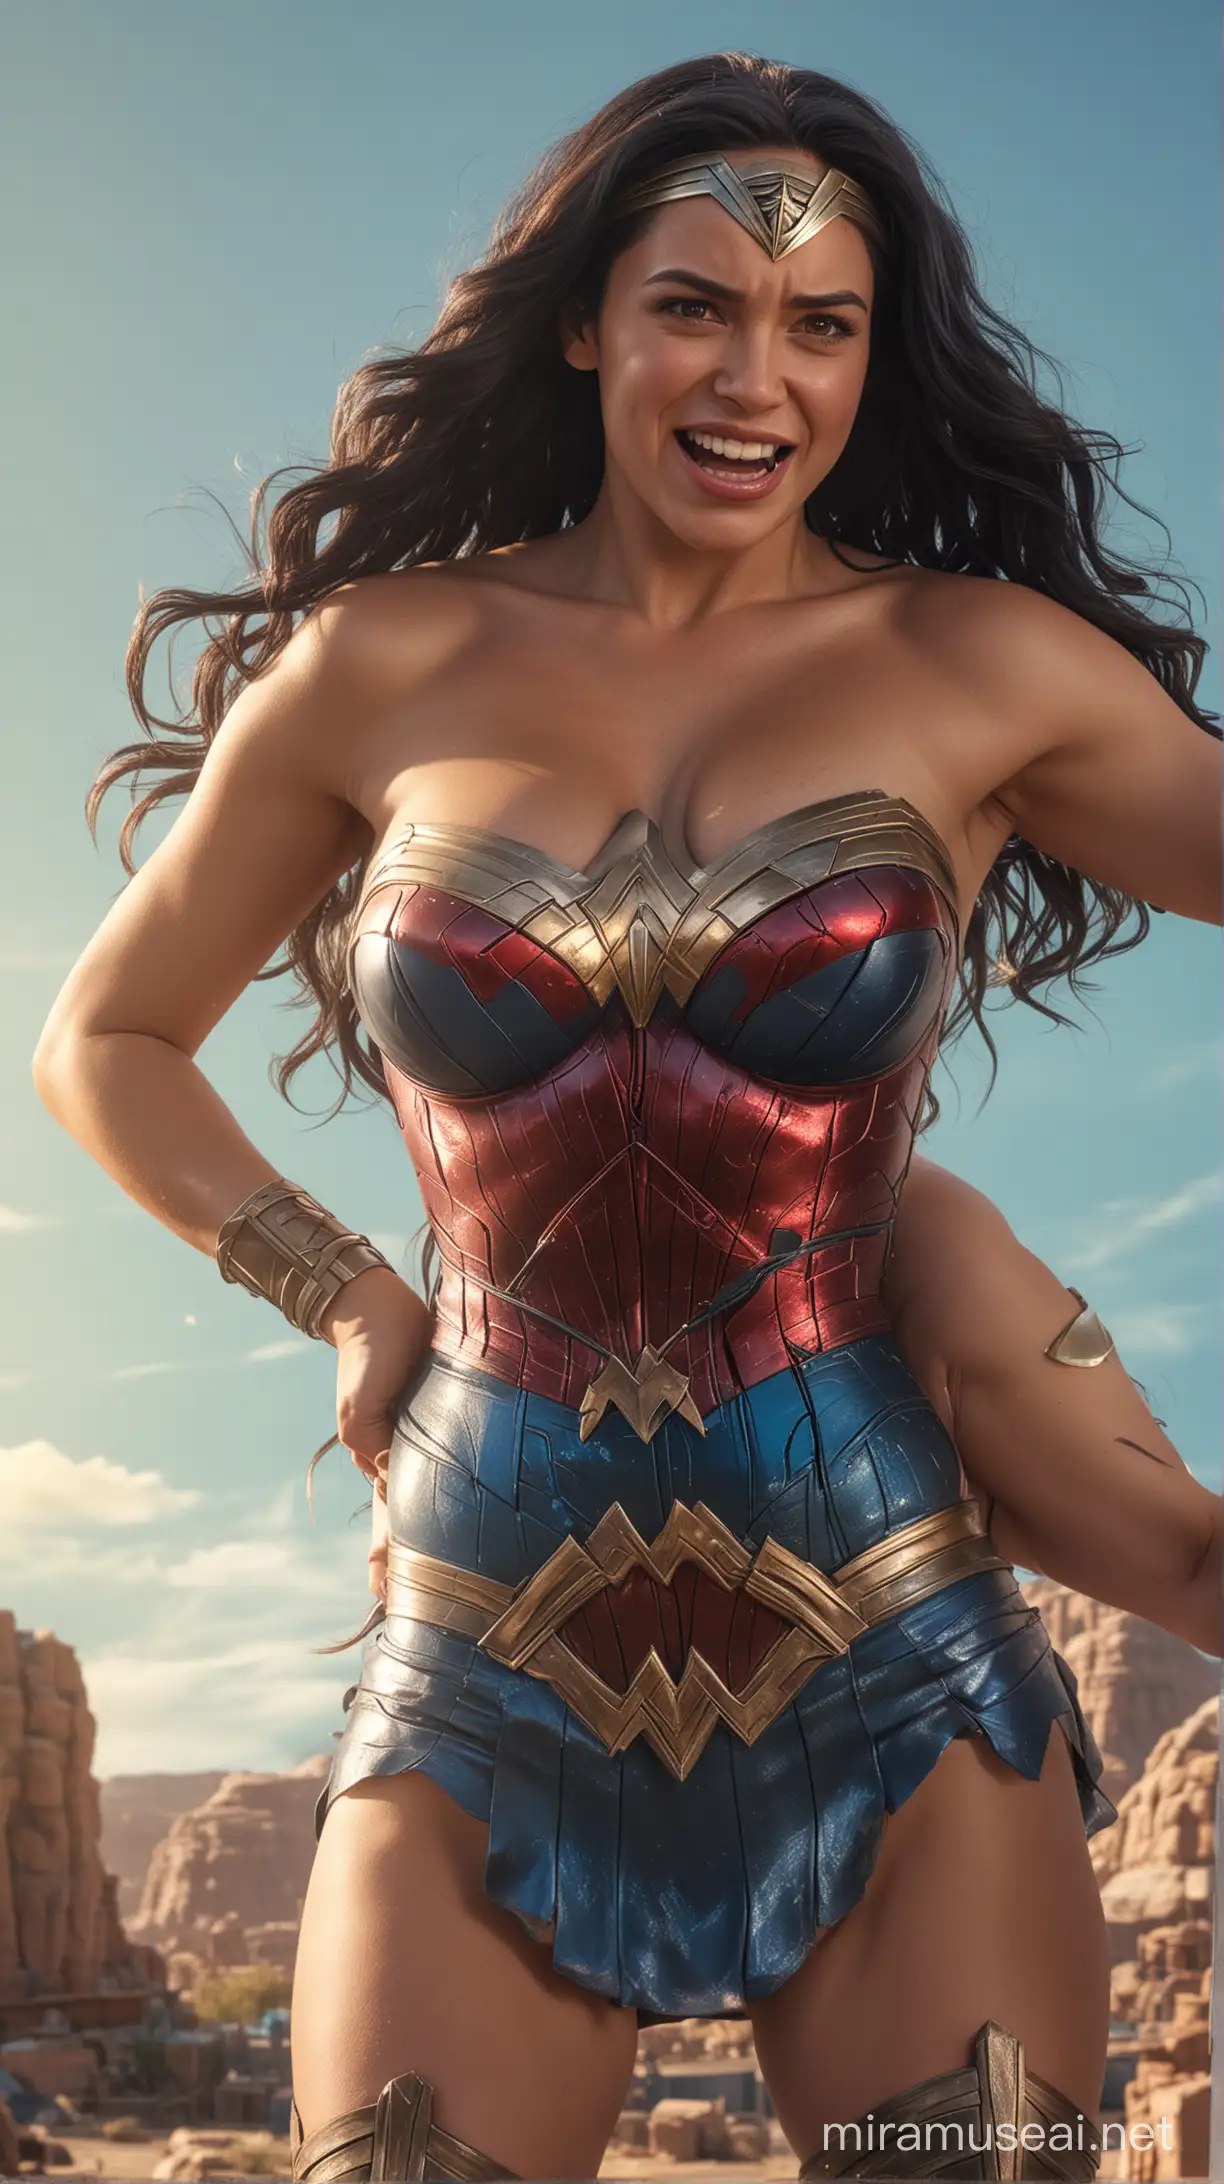 Hulk (smirking) hugging Wonder Woman (dressless, big breast, crying, open mouth) from behind, both looking at the camera, front view, large dessert in the background, hot sun shining, dazzling blue sky, super realistic photography, aggressive, cinematic